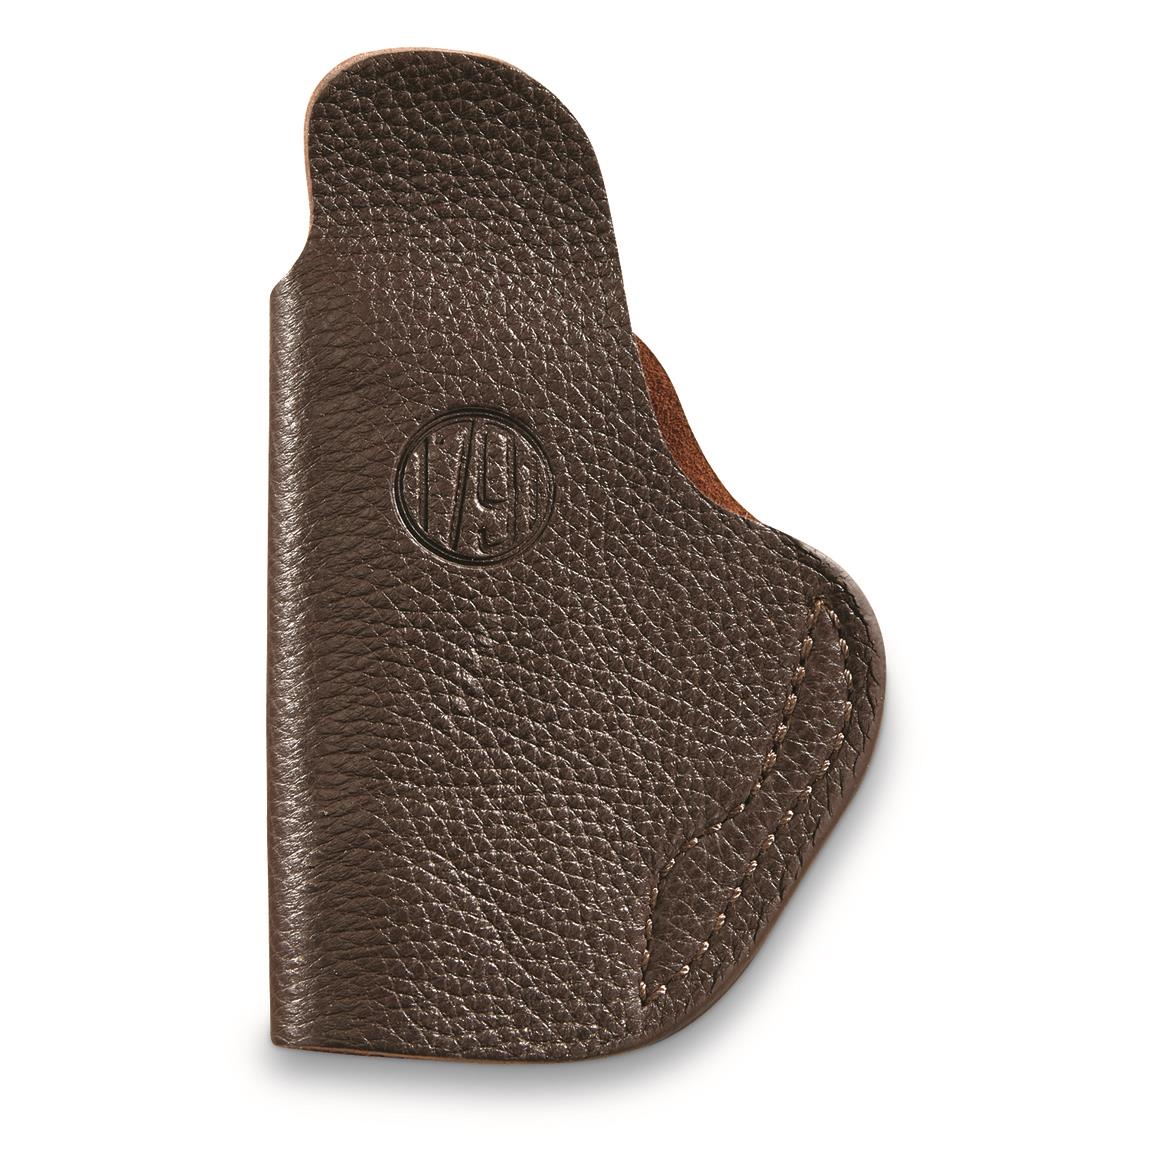 1791 Gunleather Fair Chase IWB Holster, S&W Bodyguard/Ruger LCP/CZ 2075 RAMI/Walther PPK